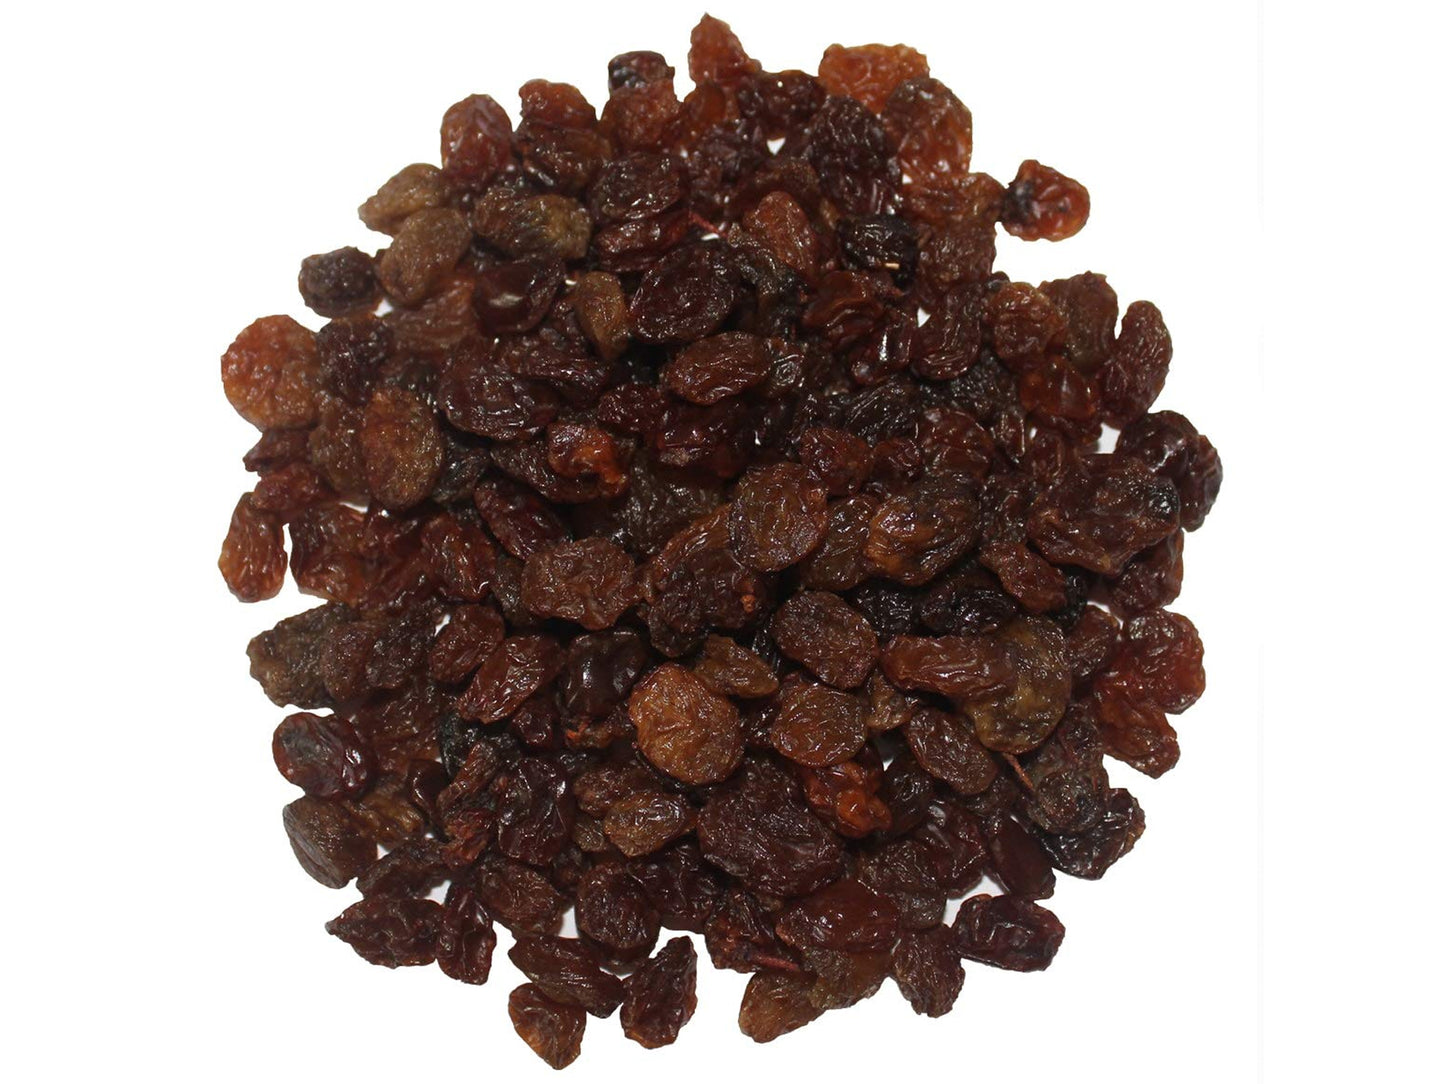 Turkish Organic Raisins — Sun Dried Thompson Seedless Select Grapes, Non-GMO, Lightly Coated with Sunflower Oil - by Food to Live